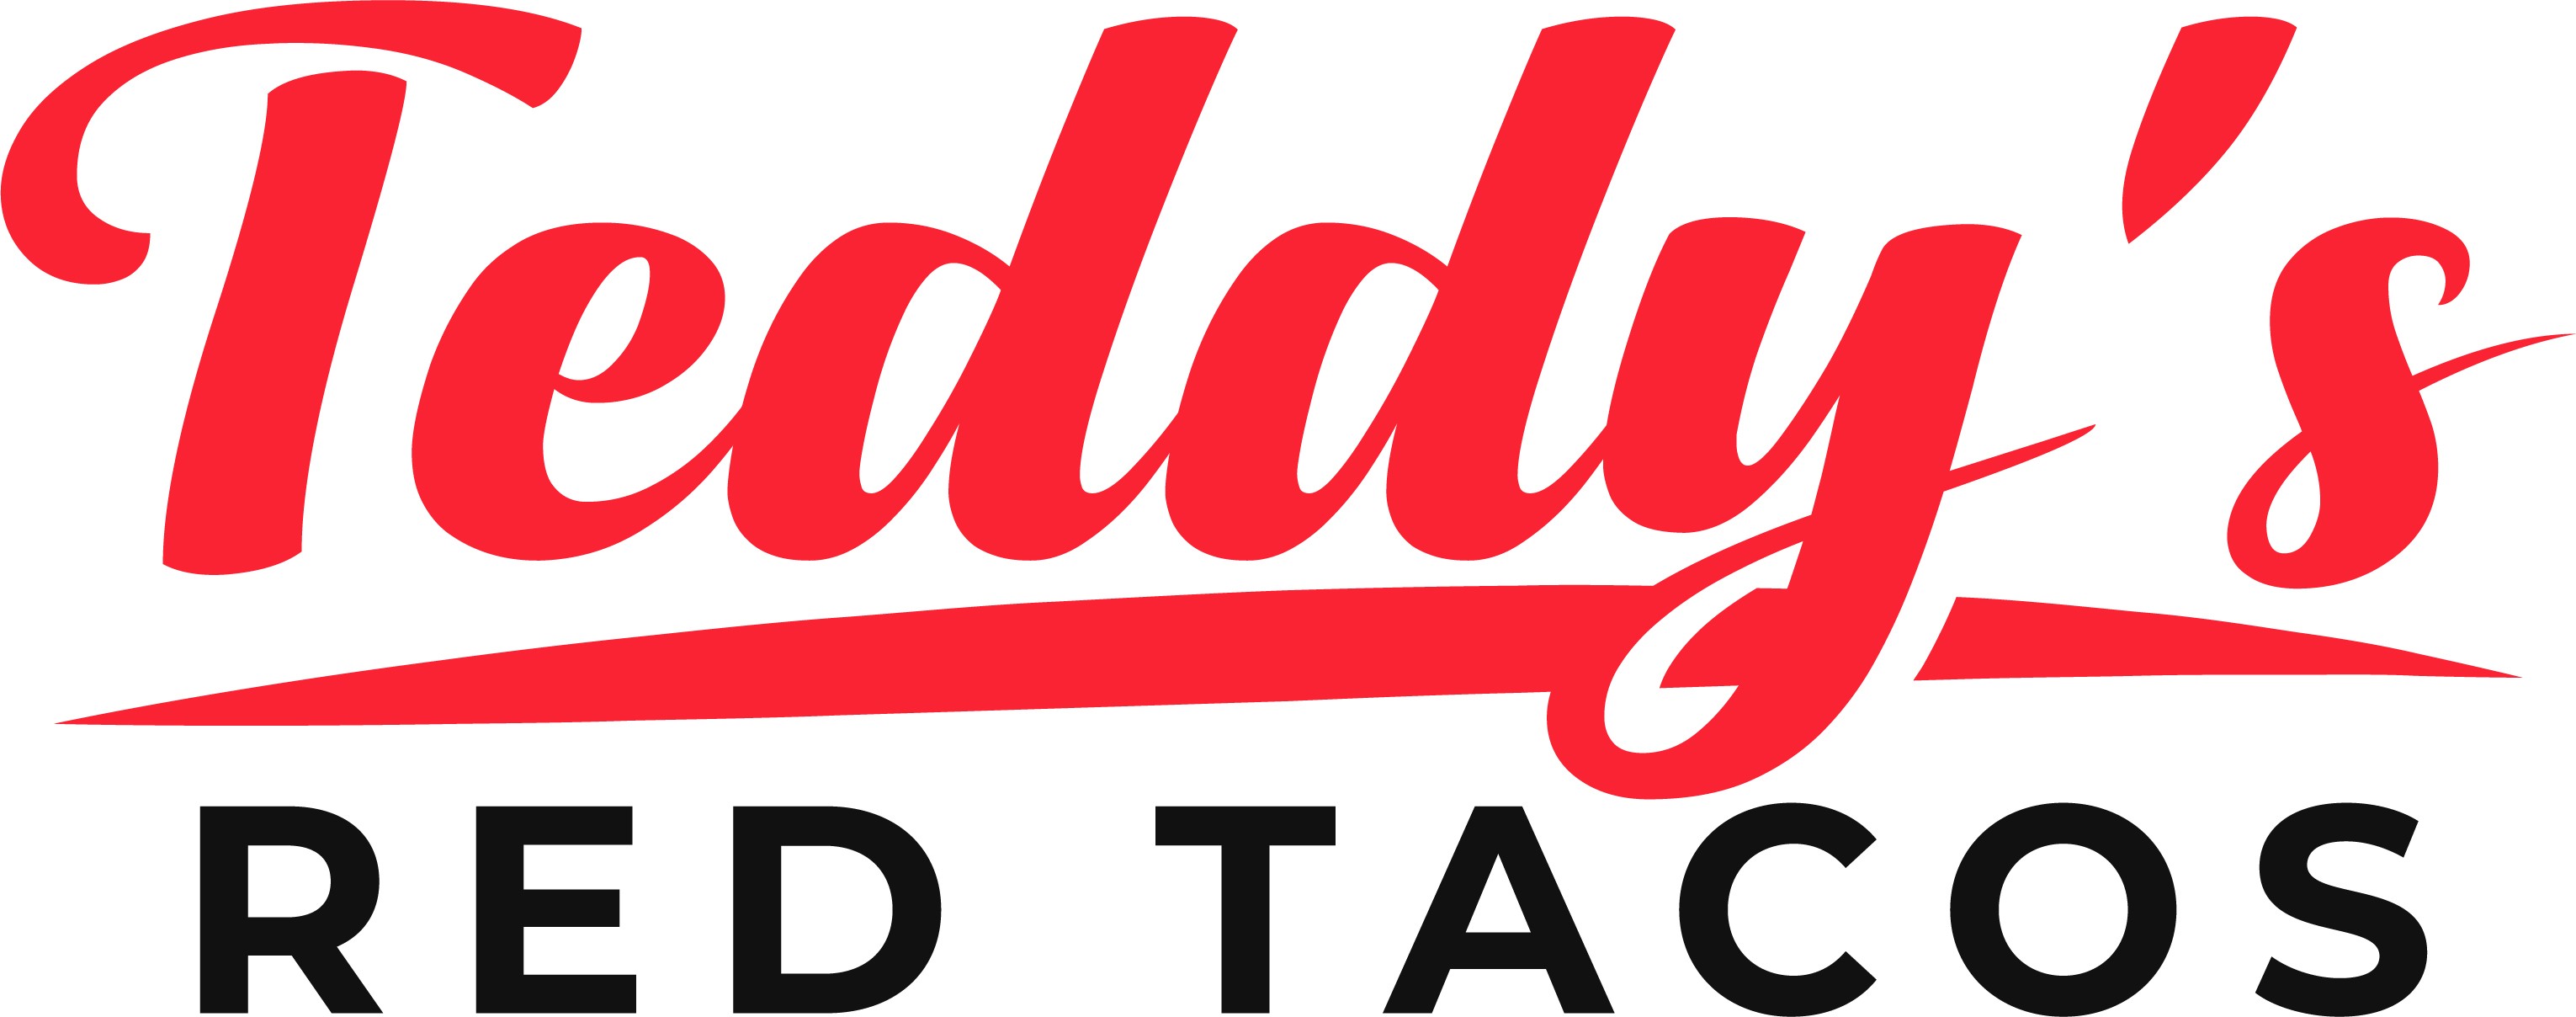 Teddy's Red Tacos - Imperial Hwy 4422 West Imperial Highway